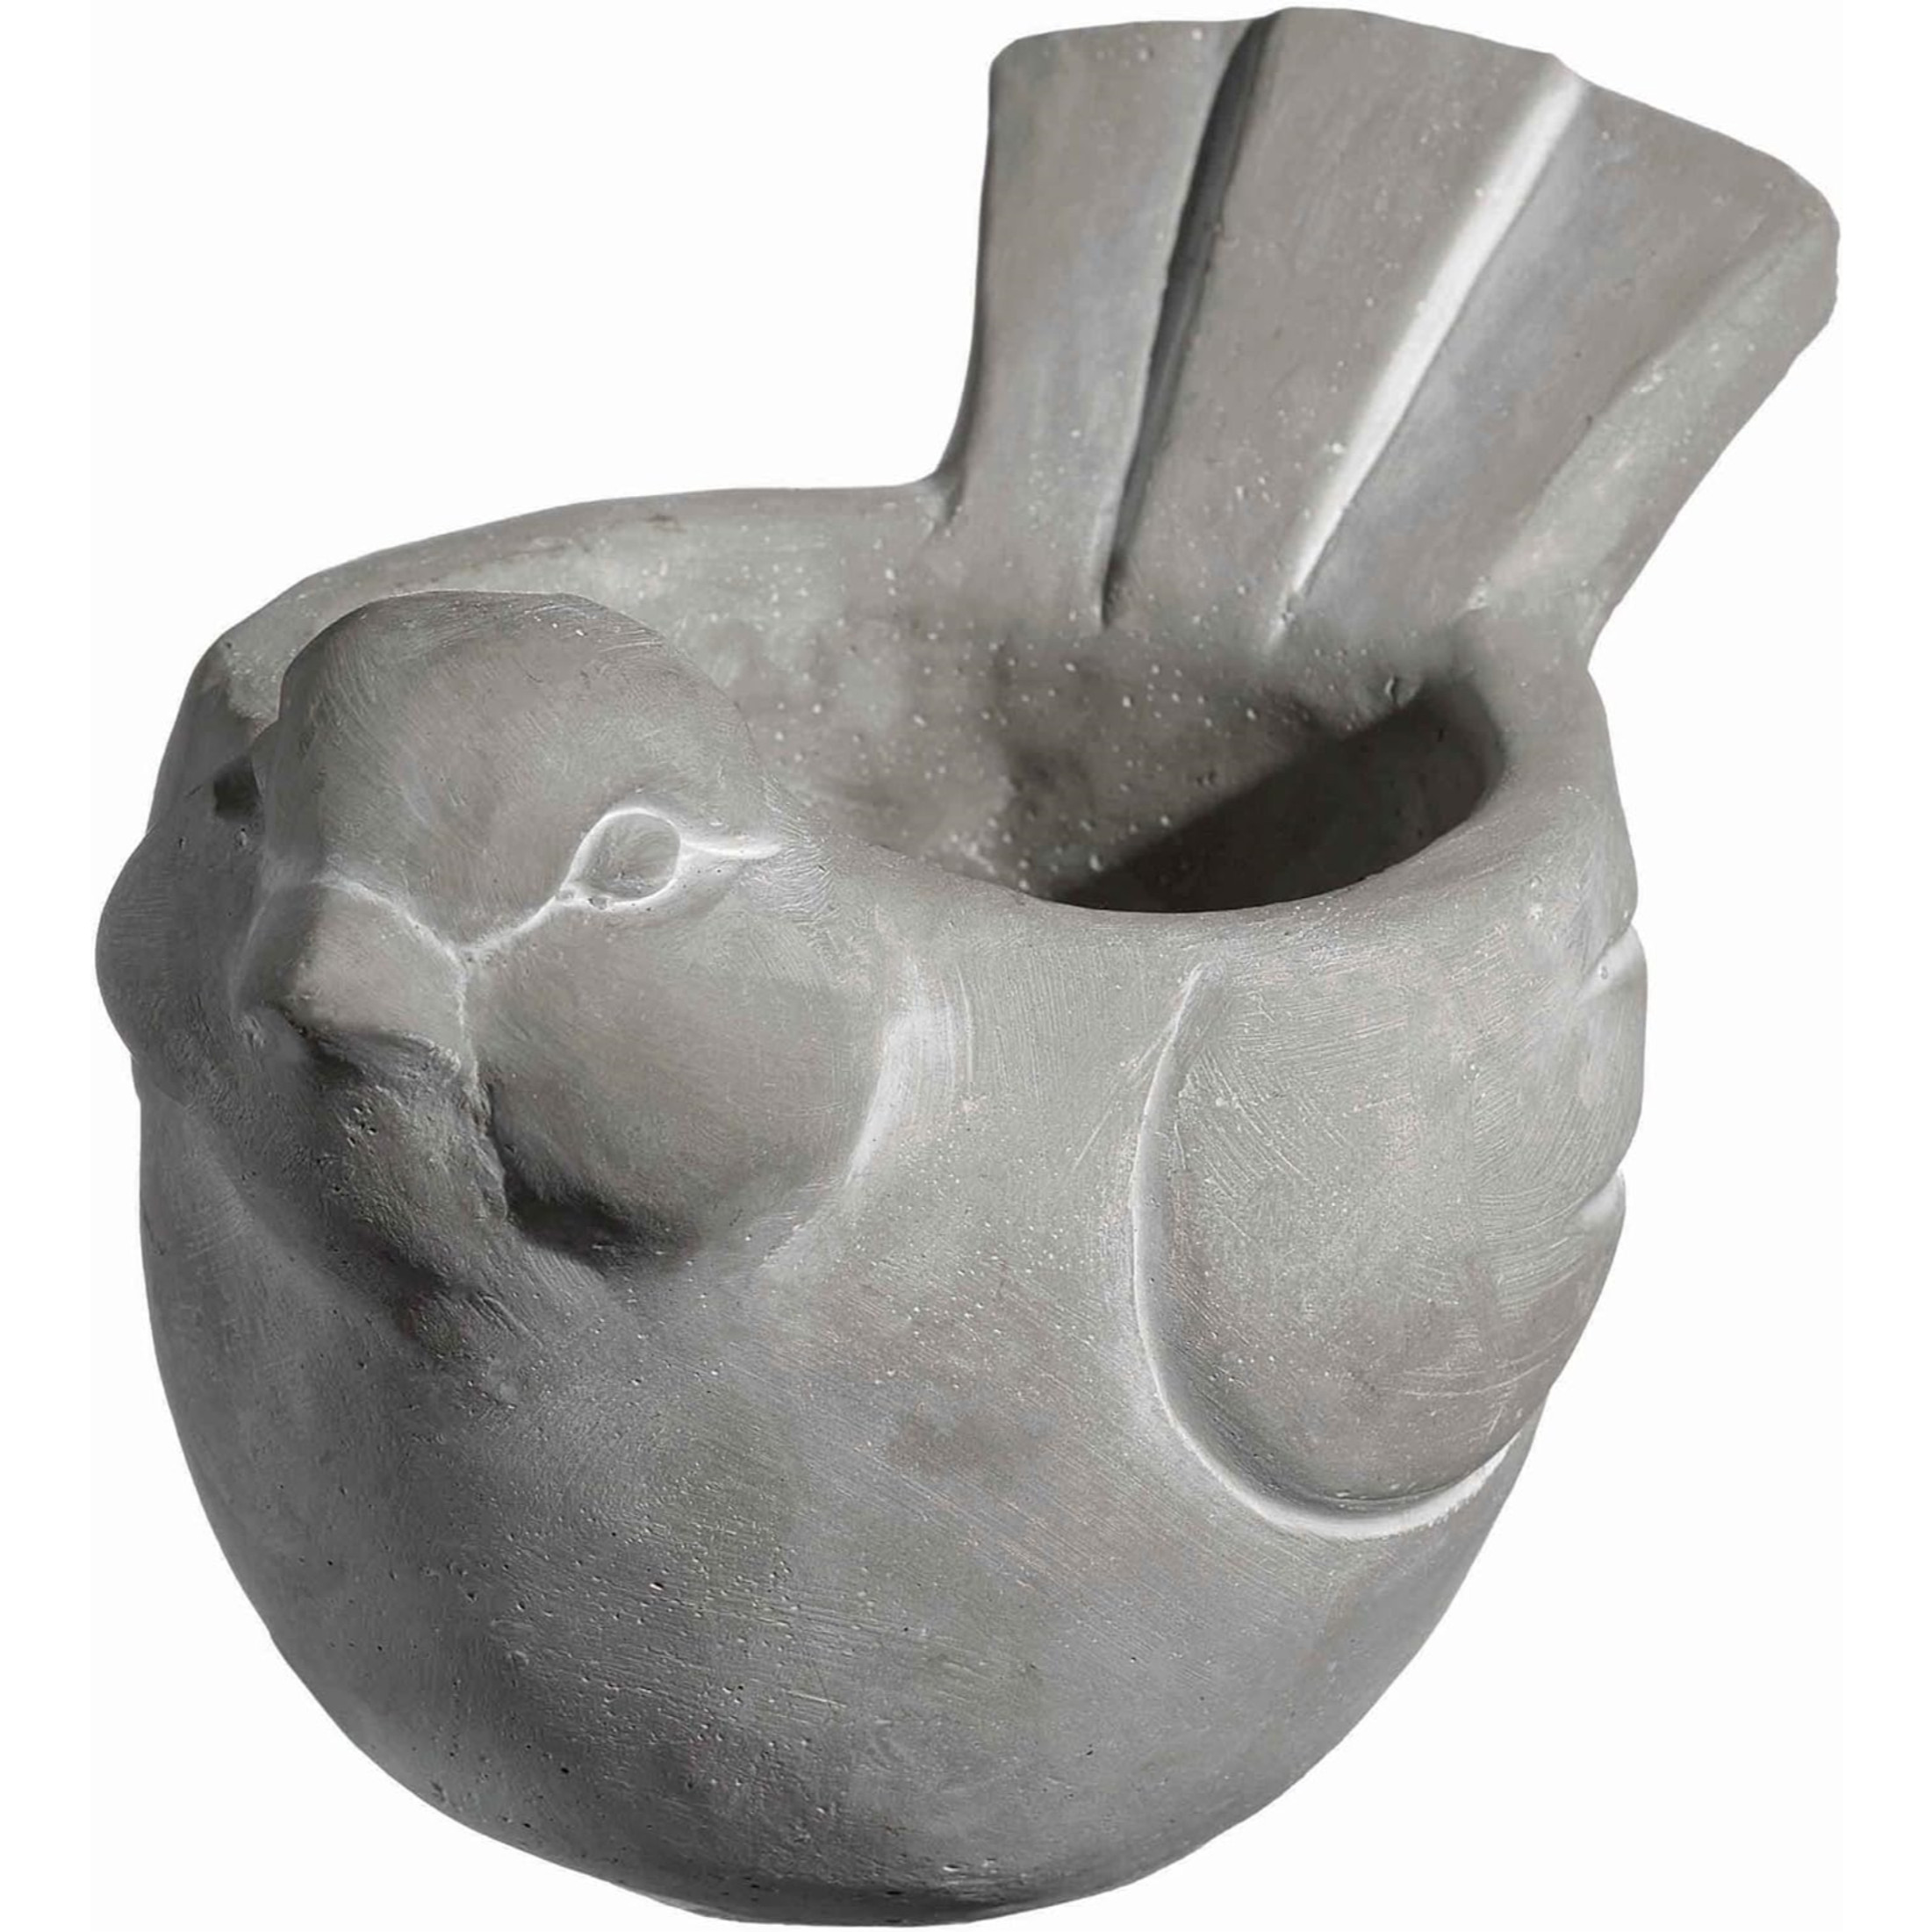 Classic Home and Garden Cement Buddies Indoor Outdoor Bird Planter with Drainage Hole